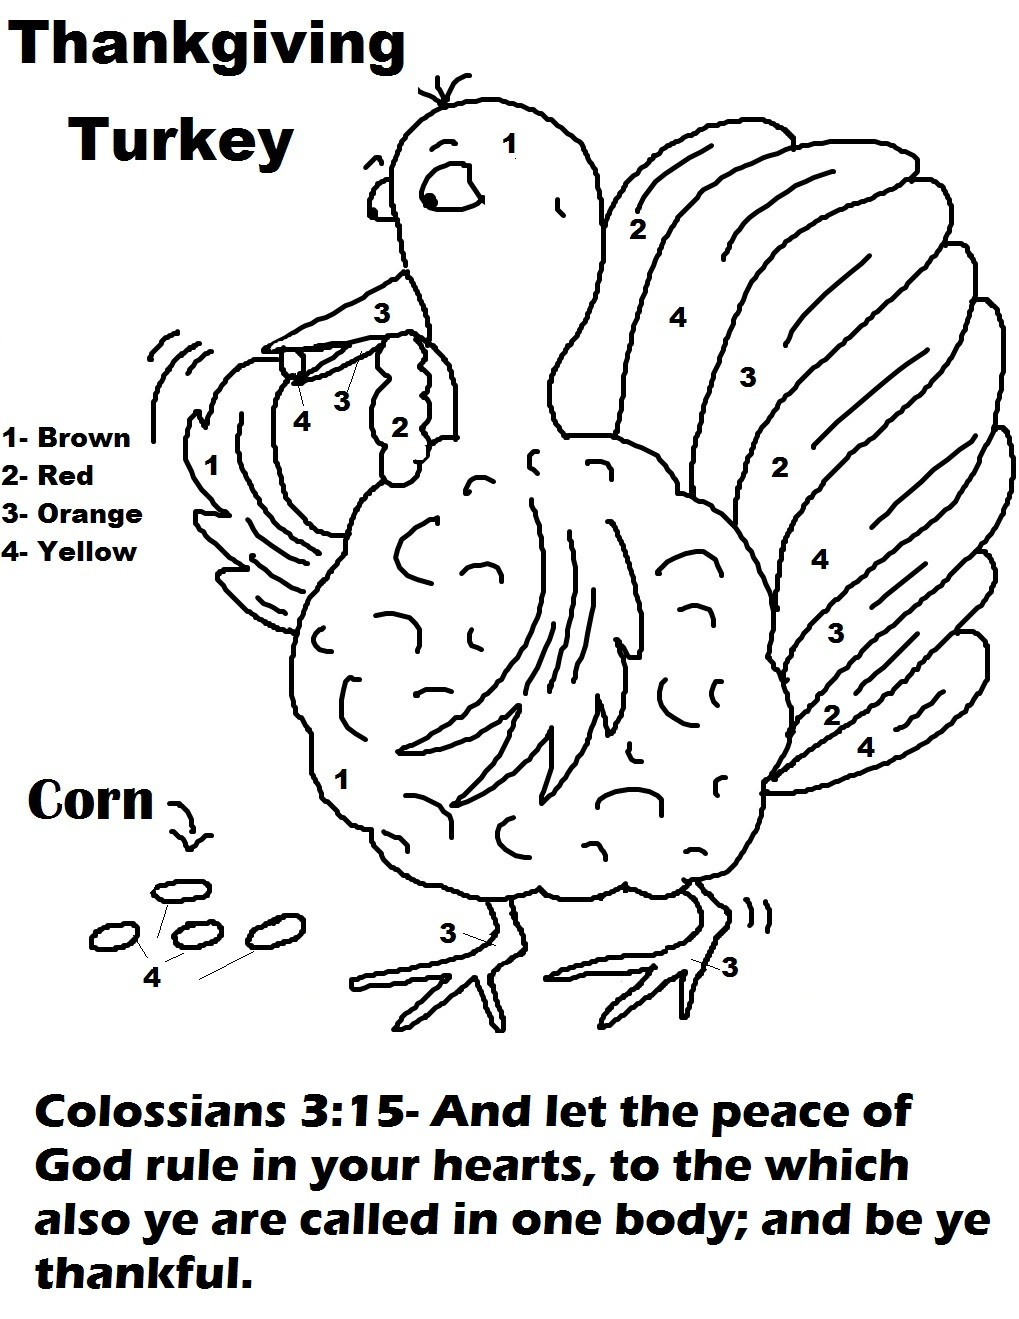 Religious Thanksgiving Coloring Pages For Kids
 Church House Collection Blog Turkey Eating Corn Coloring Page